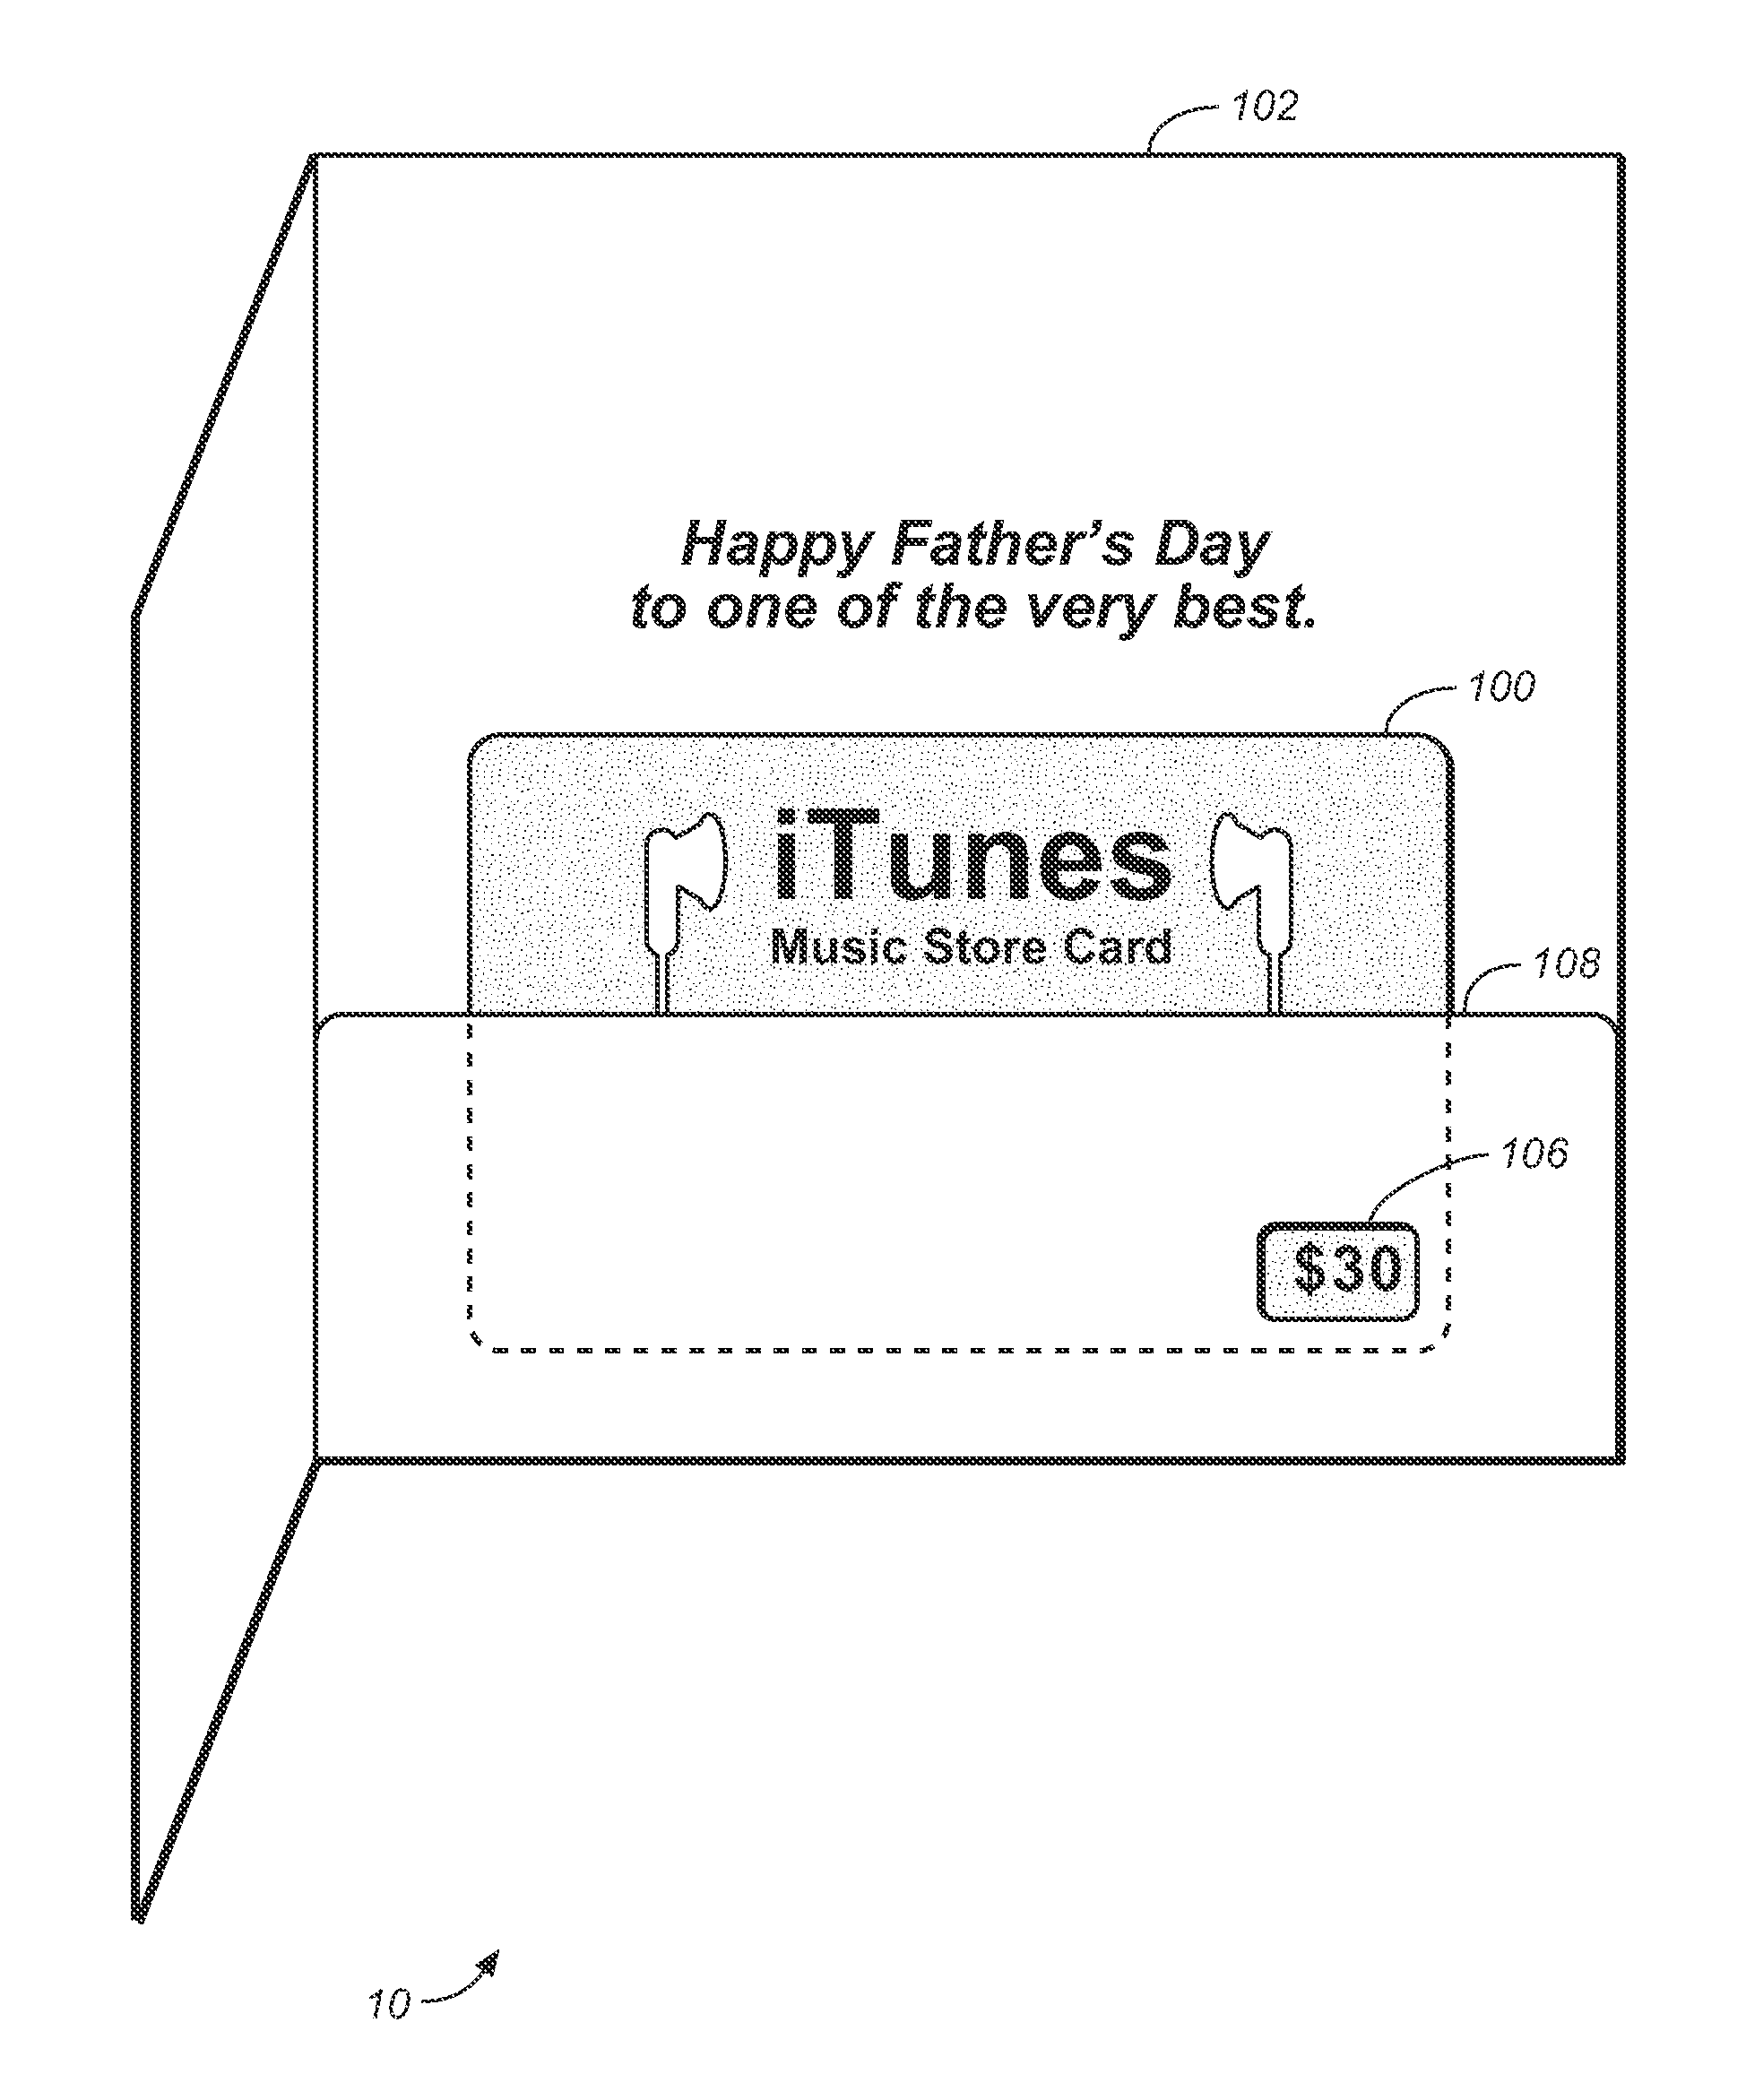 Greeting card system including a window to allow for inventory and activation